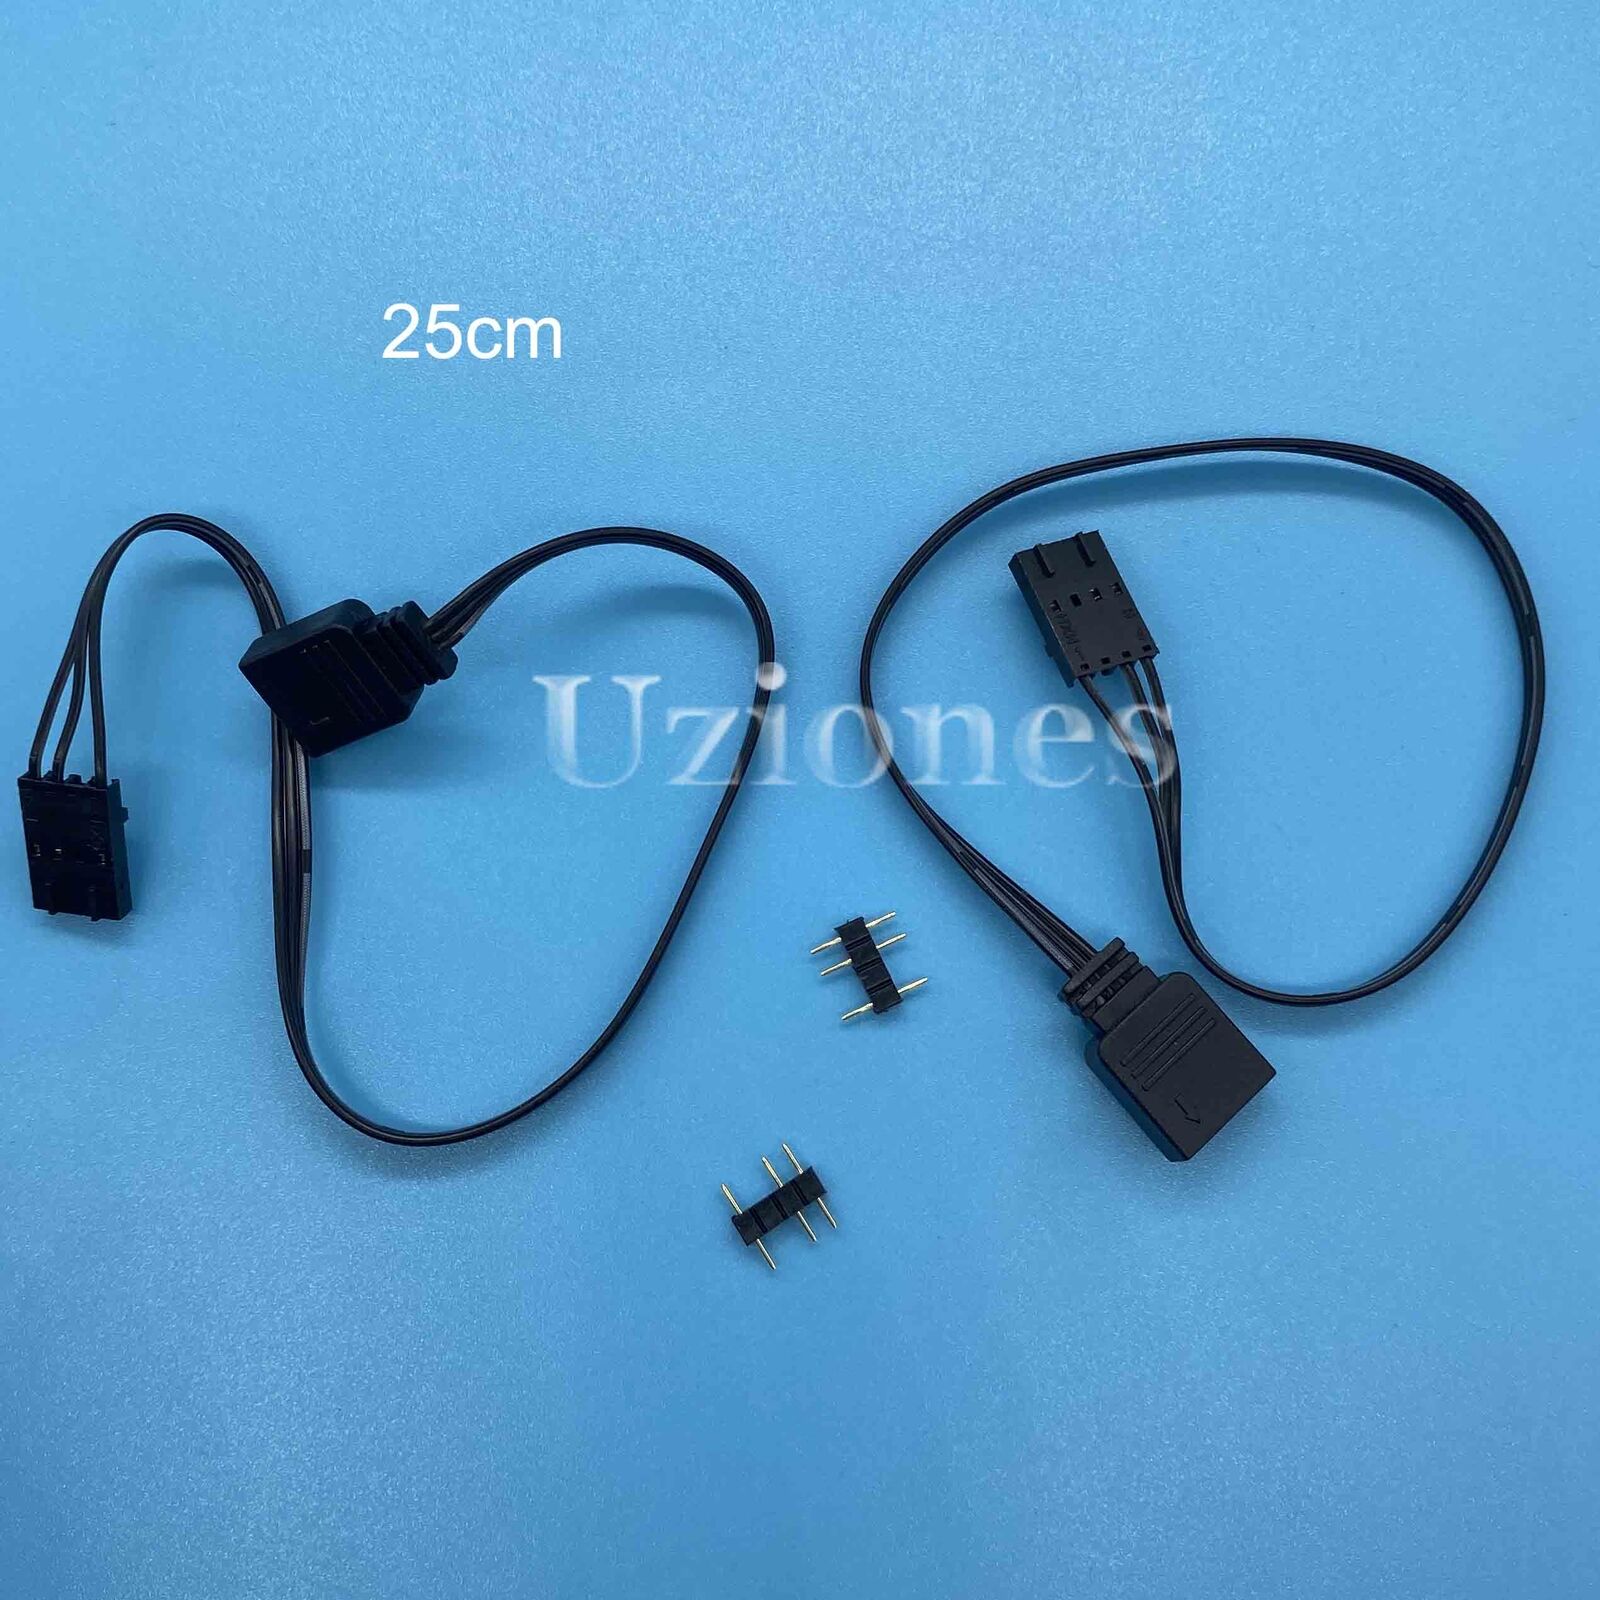 Adapter Connector Cable For Corsair 4Pin RGB to Standard ARGB 3-Pin 5V 25cm